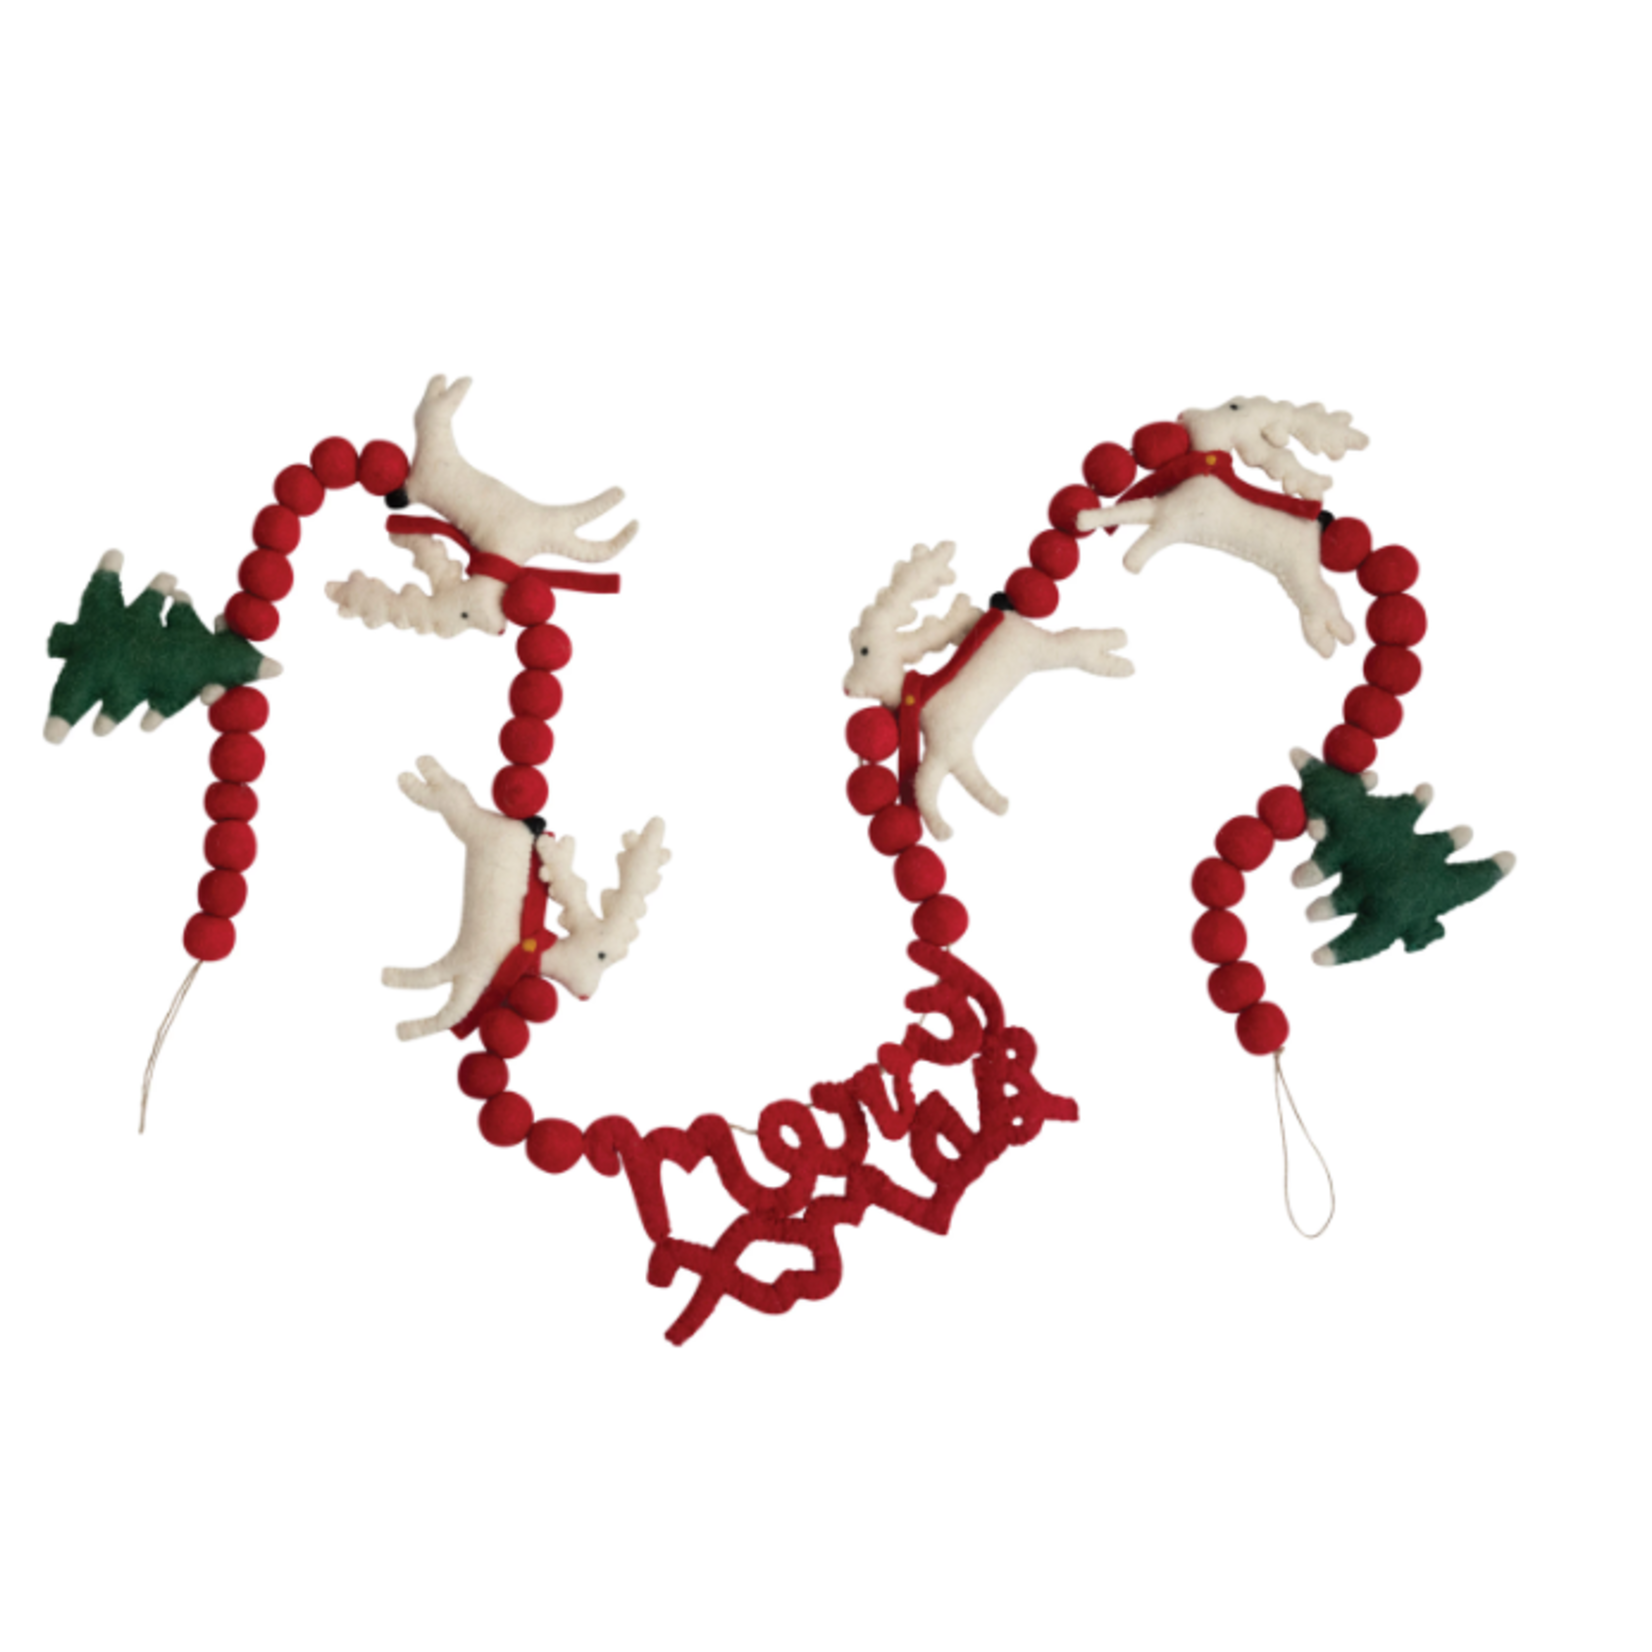 creative Co-op 72"L Wool Felt Ball Garland with Reindeer and Trees "Merry Xmas", Red, White and Green